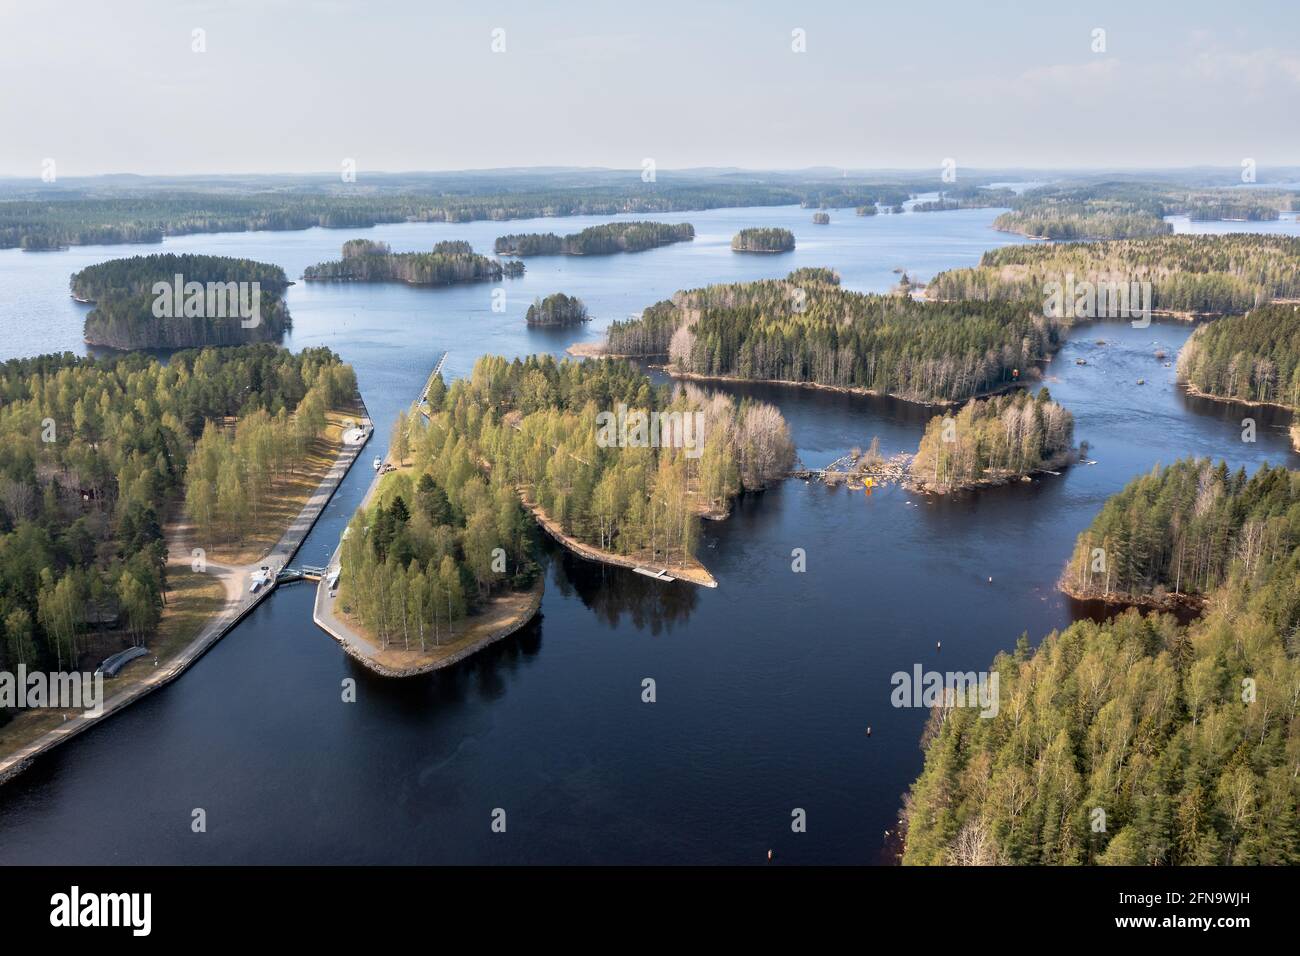 Three canals of different ages in the lake area of Eastern Finland. One of the canals is now regulated and one for museum use, newest for traffic use. Stock Photo